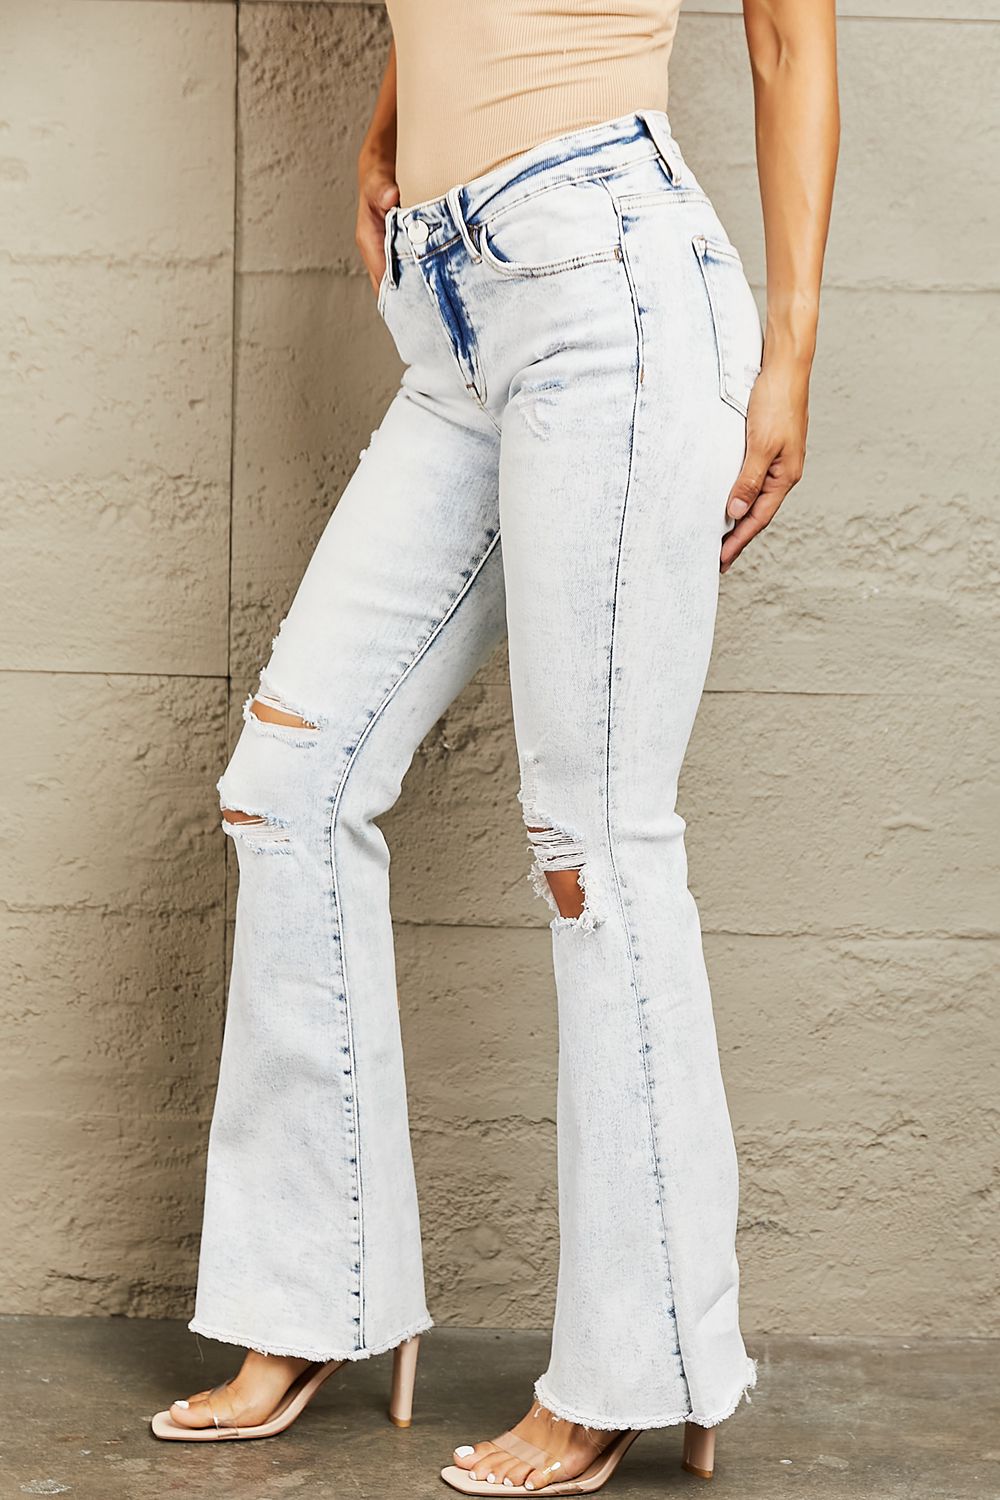 BAYEAS Mid Rise Acid Wash Distressed Jeans - nailedmoms